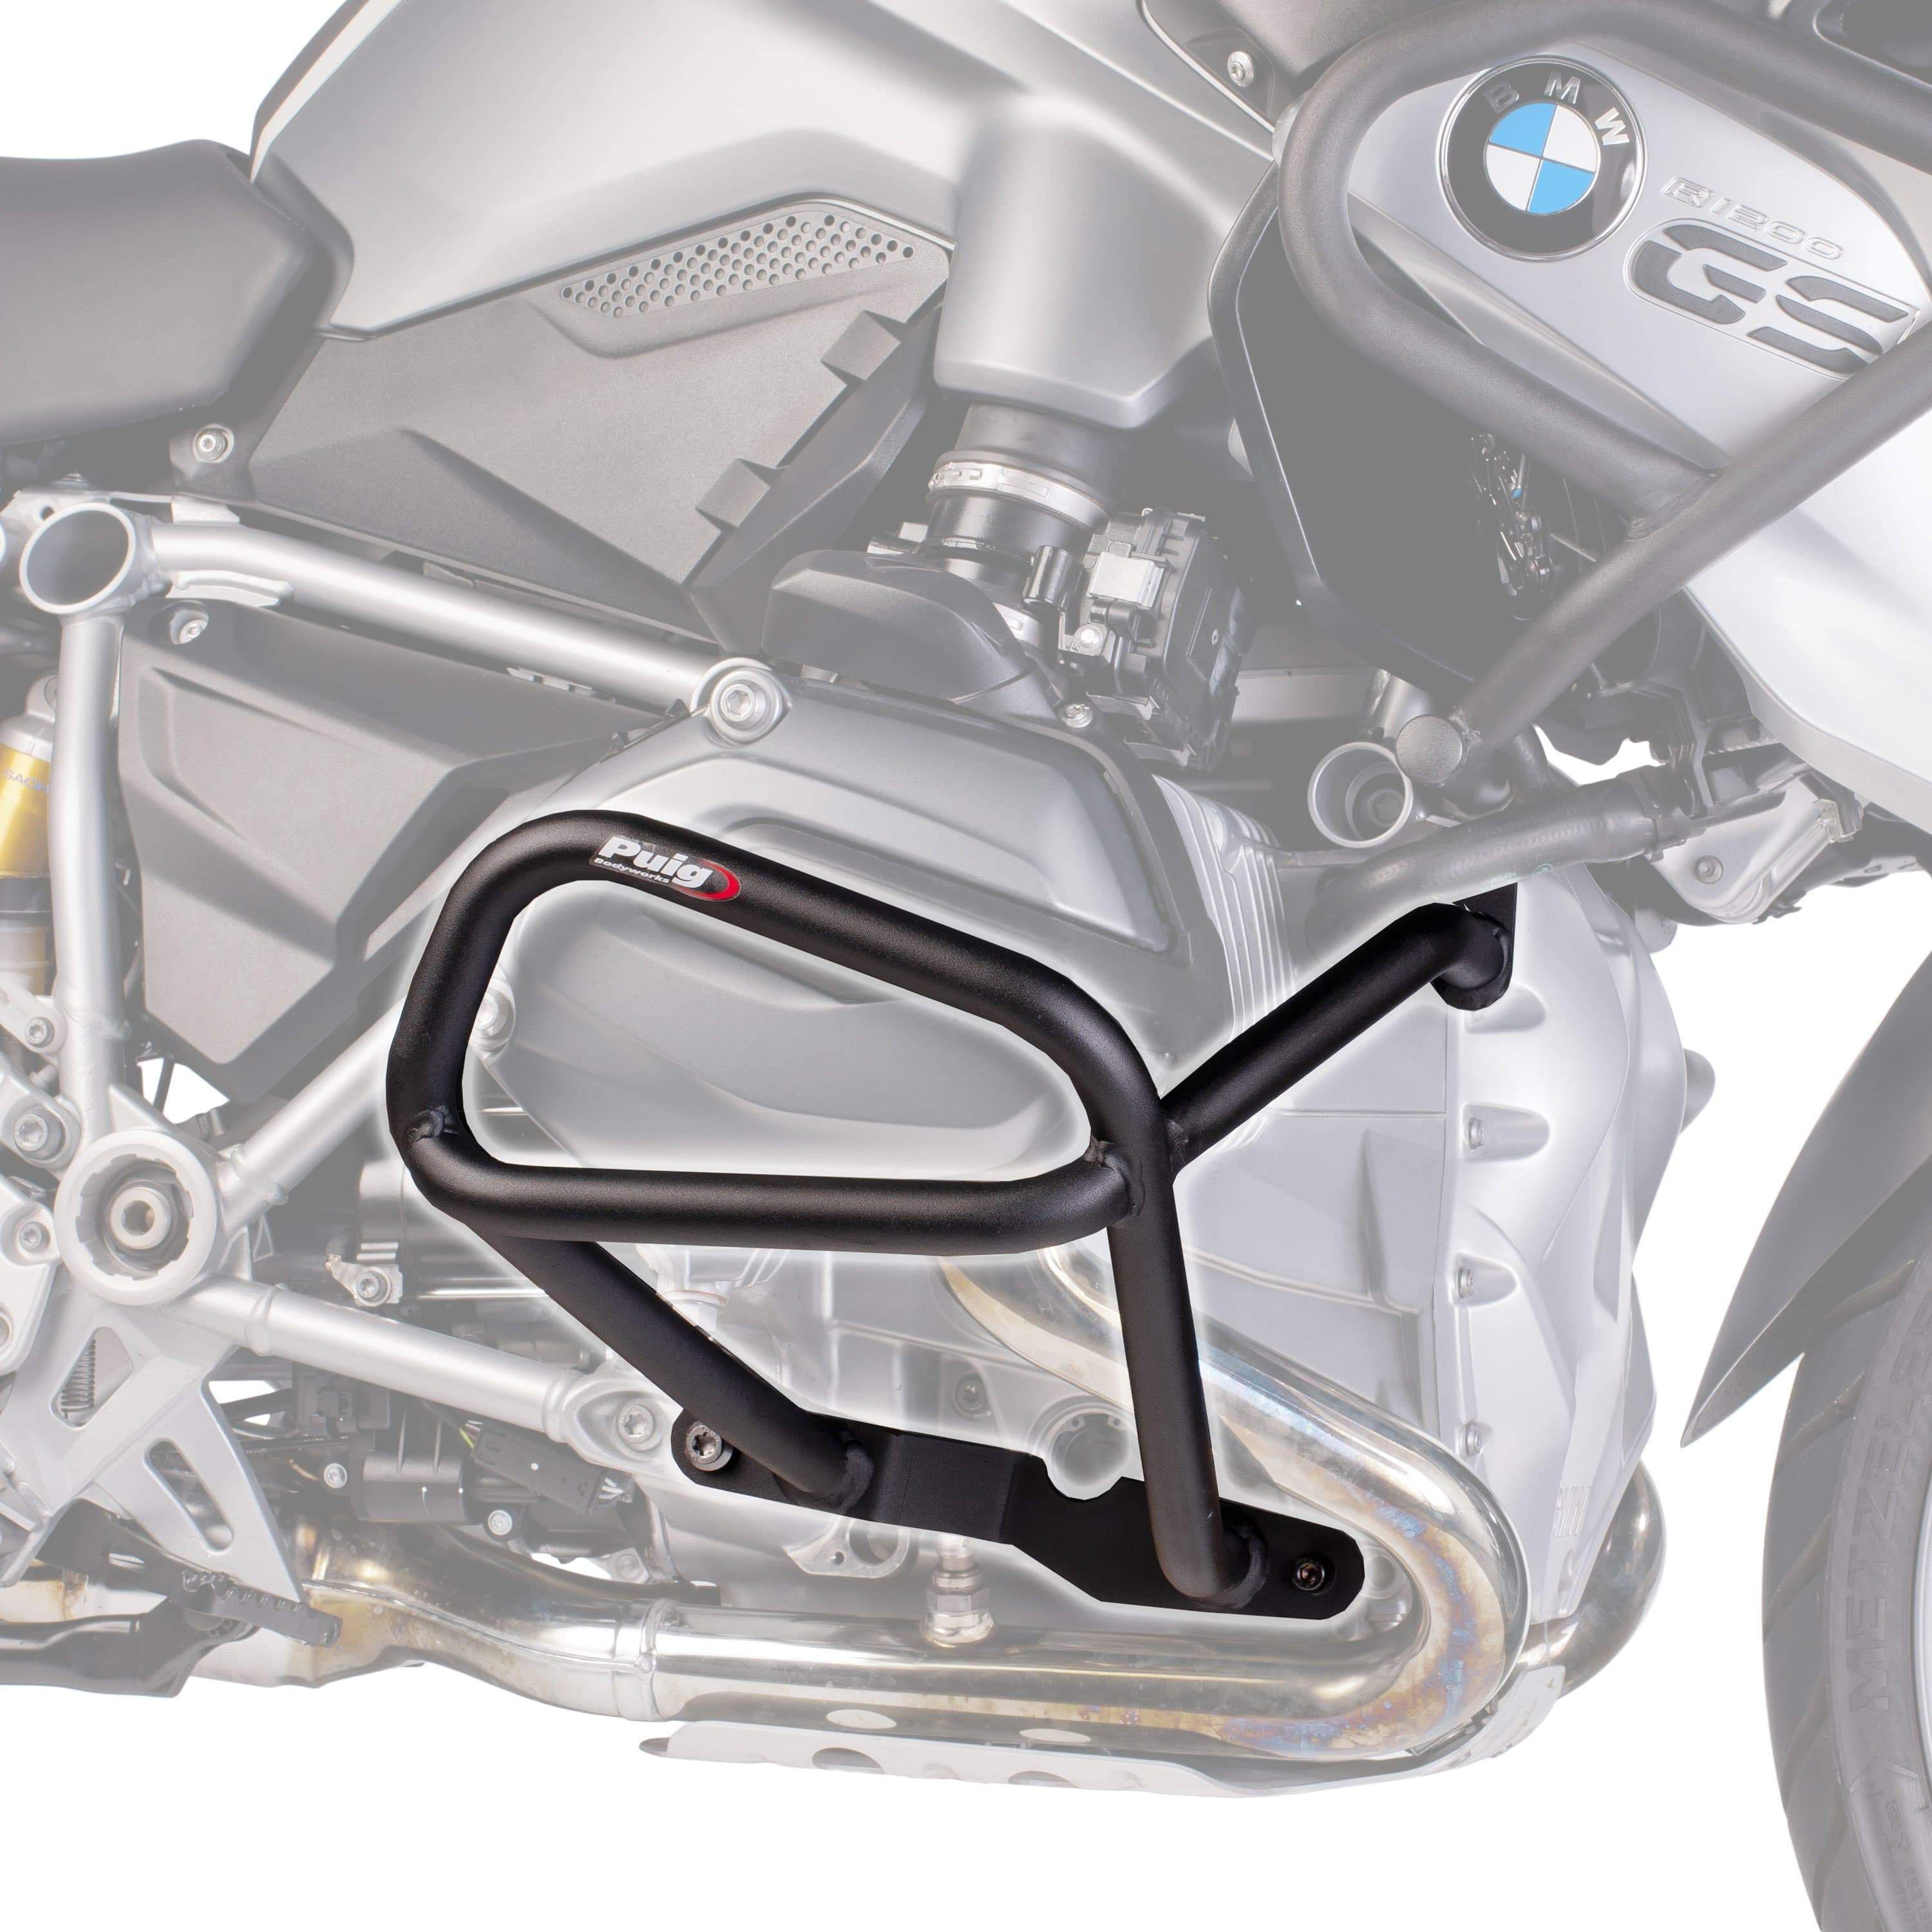 Puig Engine Guards | Low Black | BMW R1200 GS Rallye/Exc 2017>2018-M7543N-Engine Guards-Pyramid Motorcycle Accessories